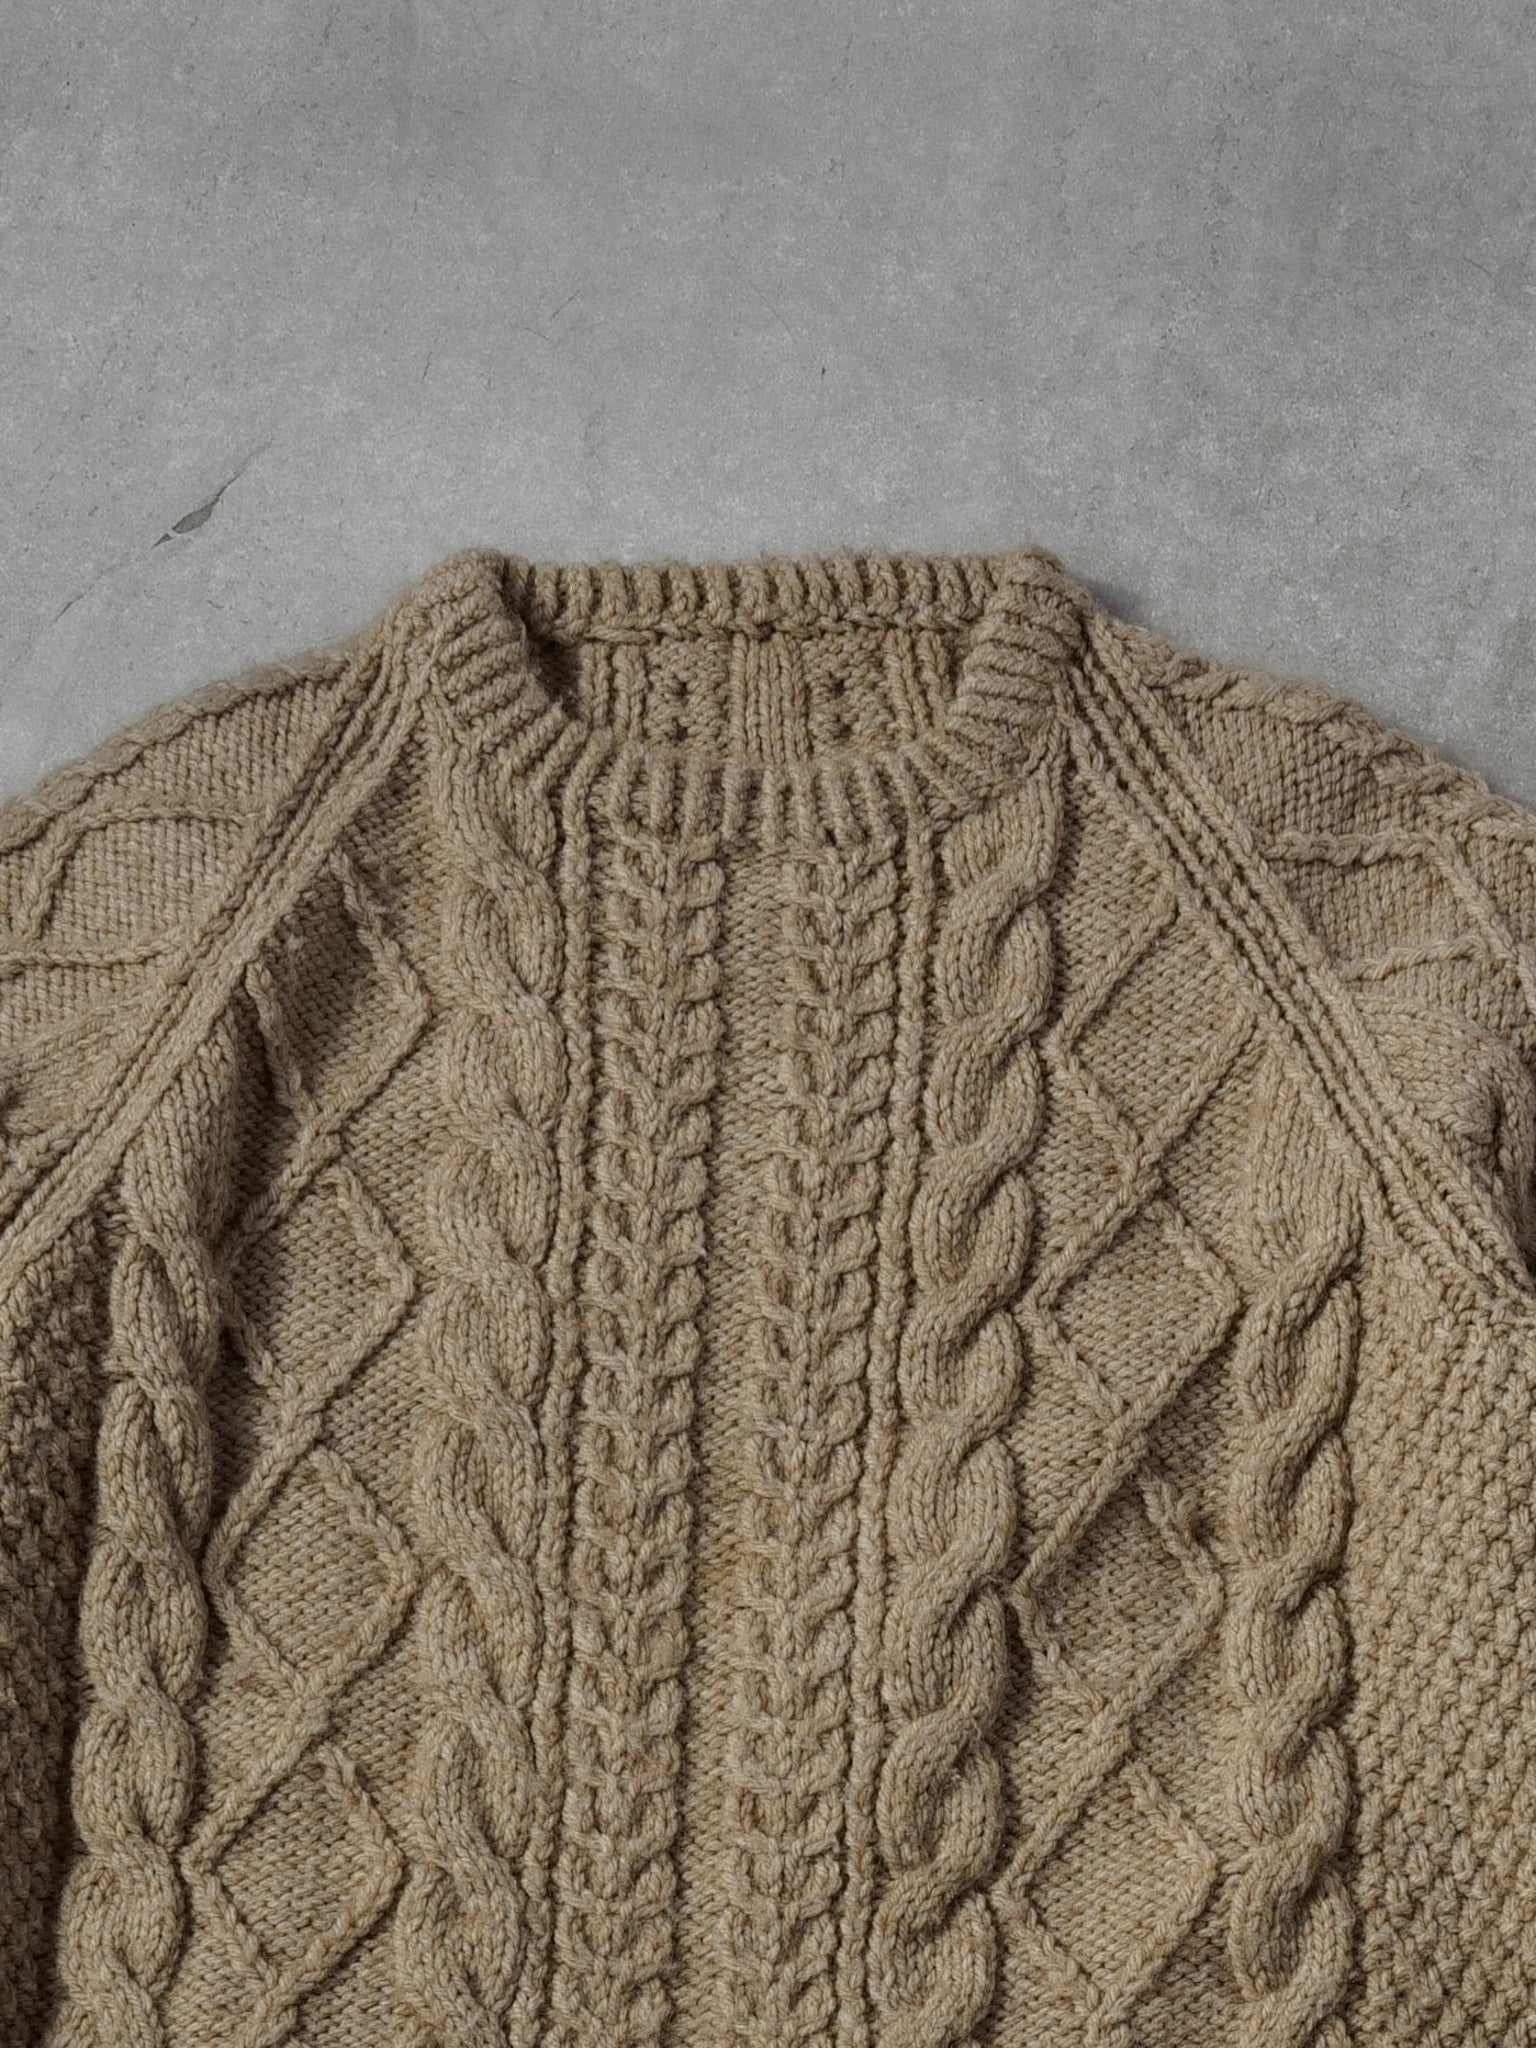 Vintage 90s Light Brown Cable Knit Patterned Sweater (S)